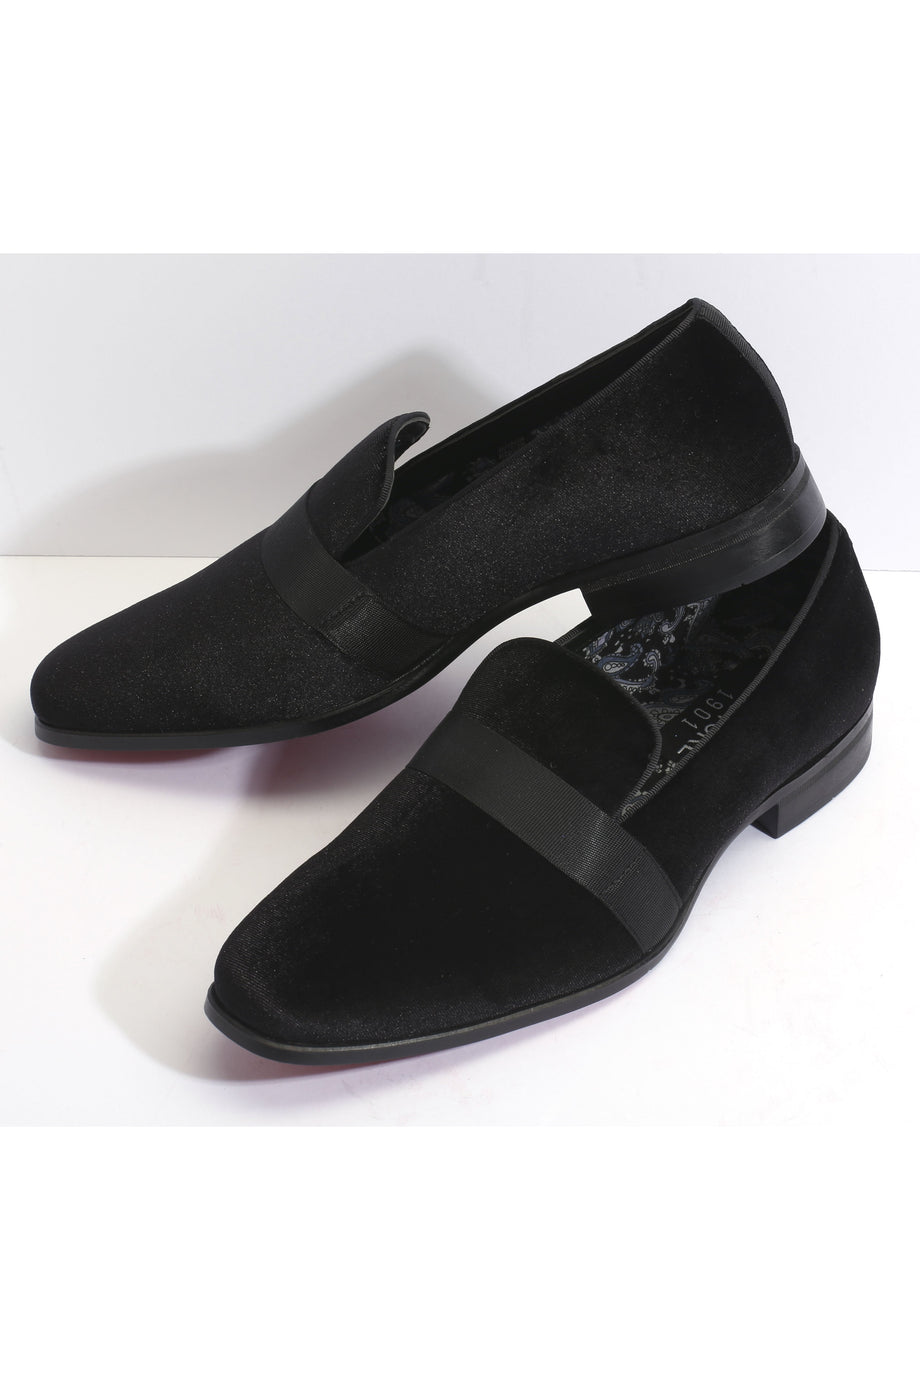 Couture 1901 "Lincoln" Black Couture 1901 Tuxedo Shoes